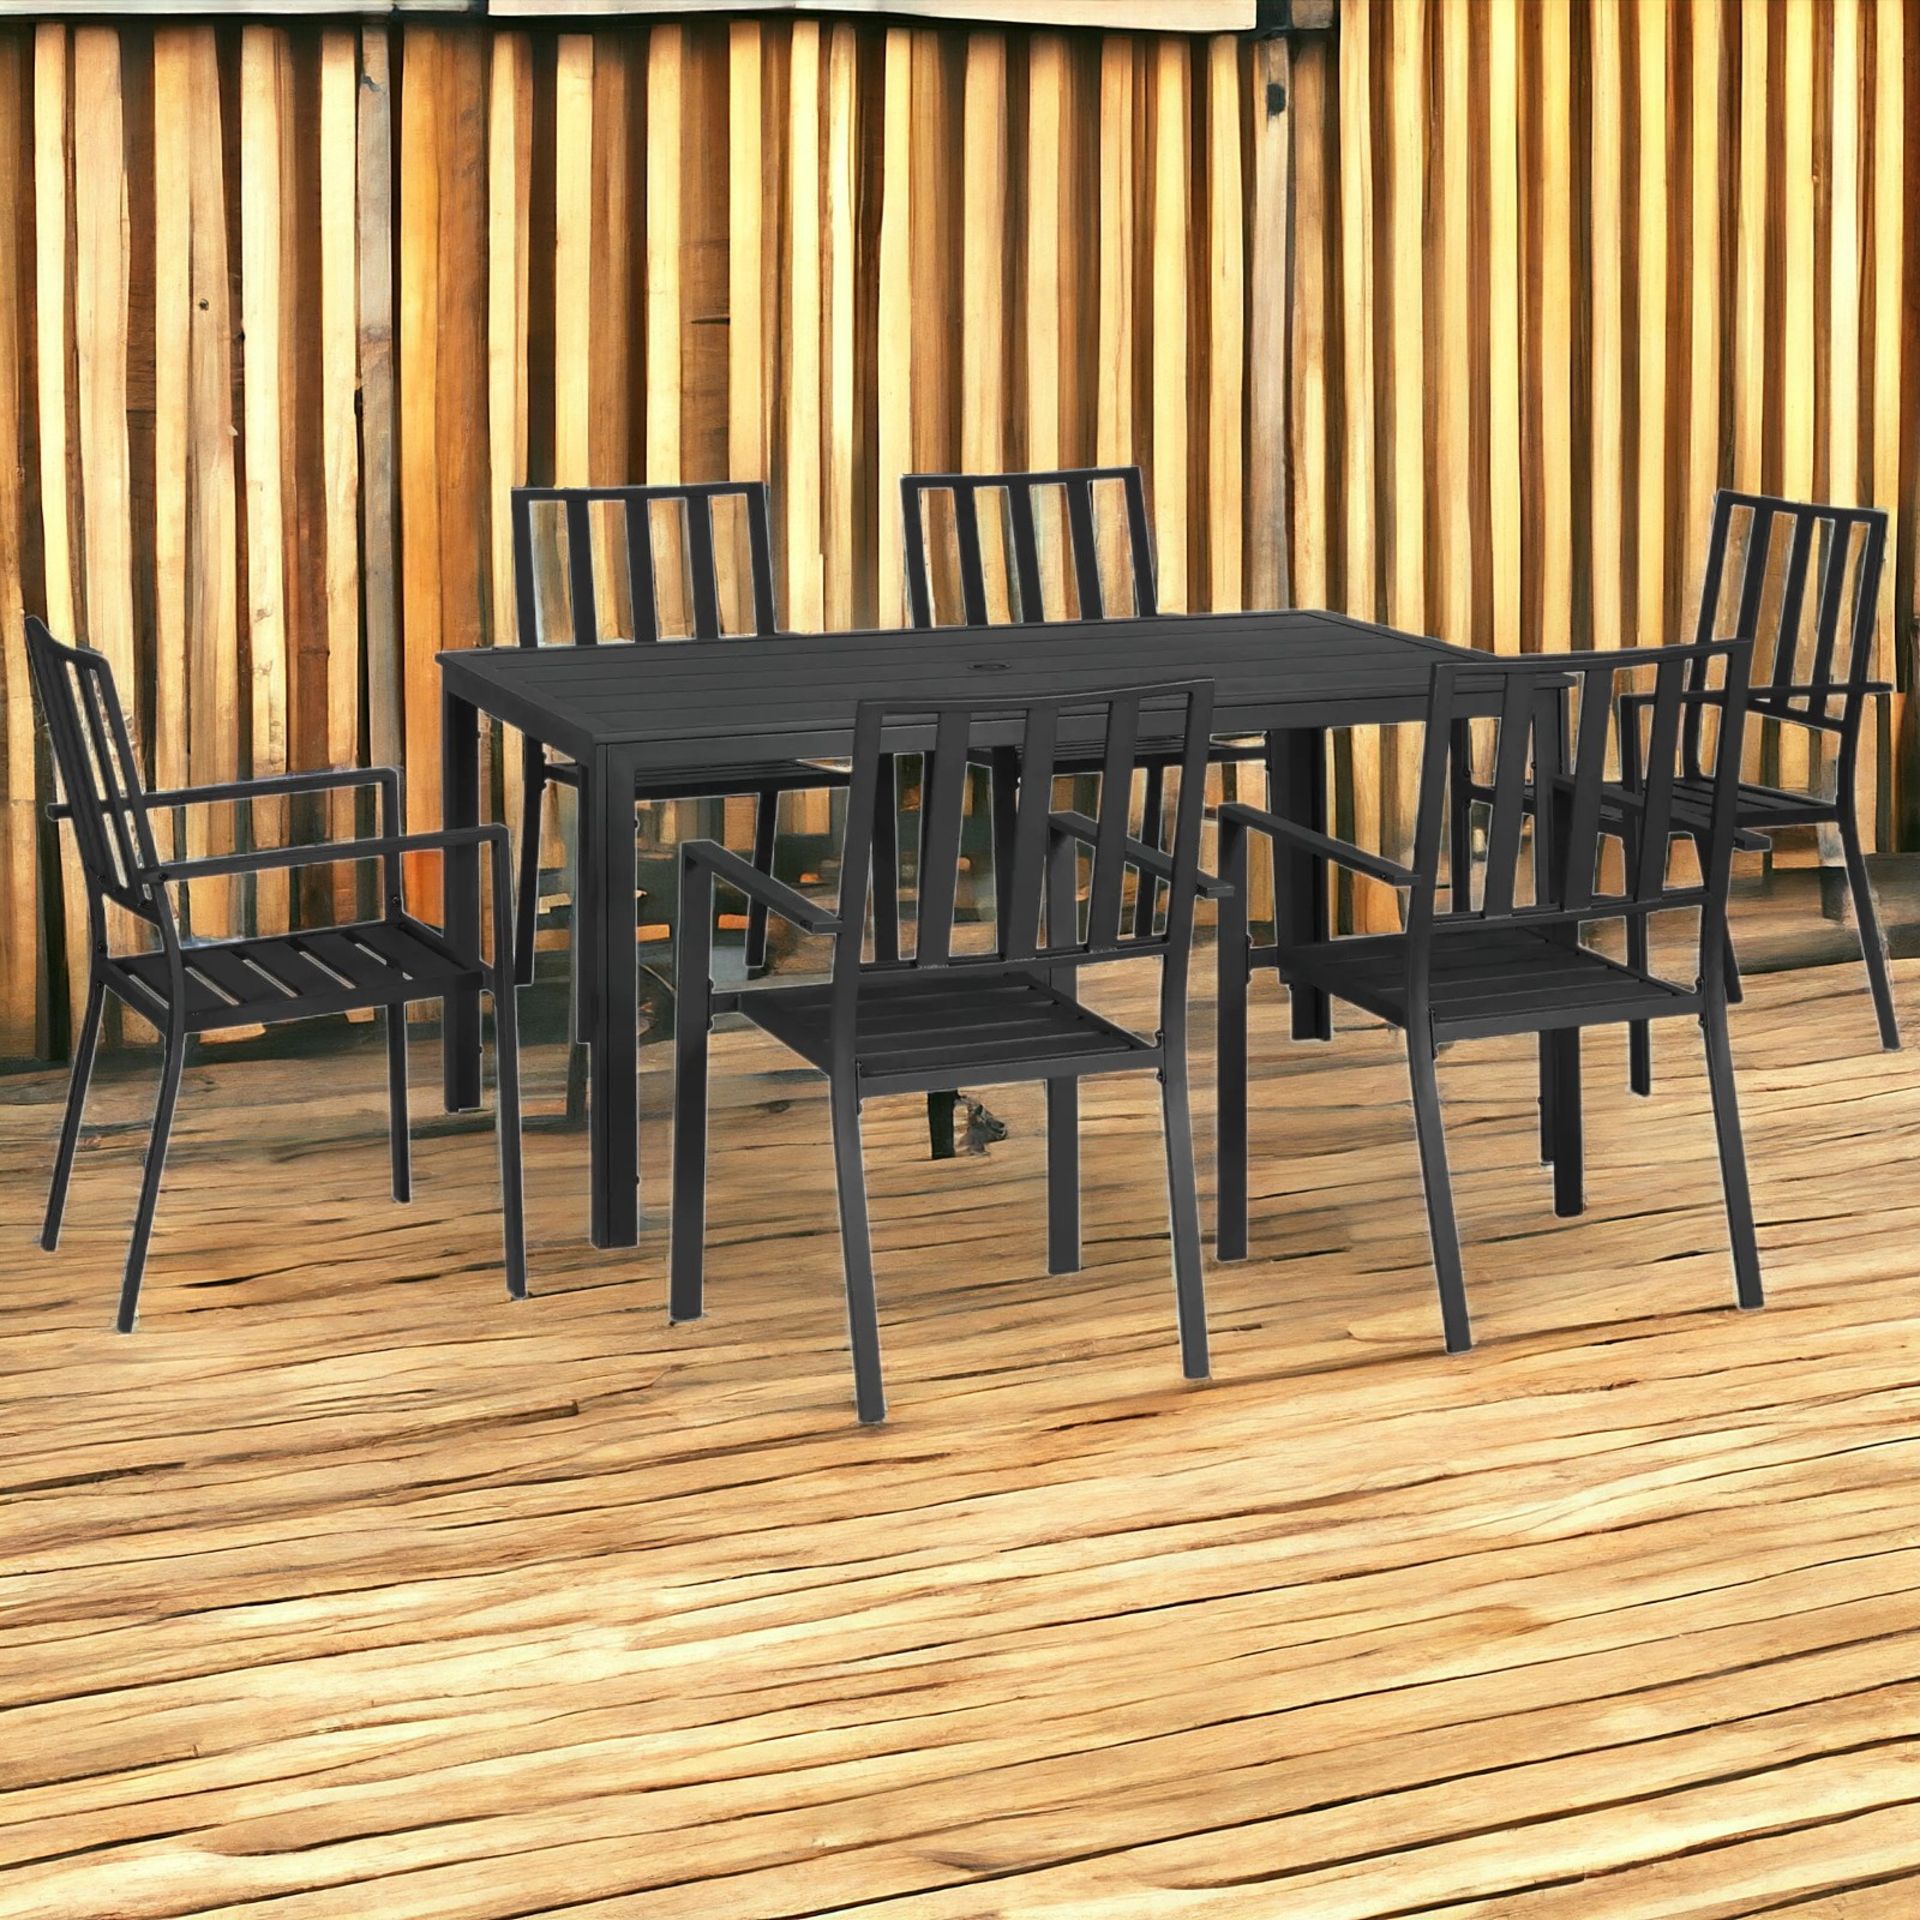 FREE DELIVERY - BRAND NEW 7 PCS GARDEN DINING SET W/ STACKABLE CHAIRS AND METAL TOP TABLE, BLACK